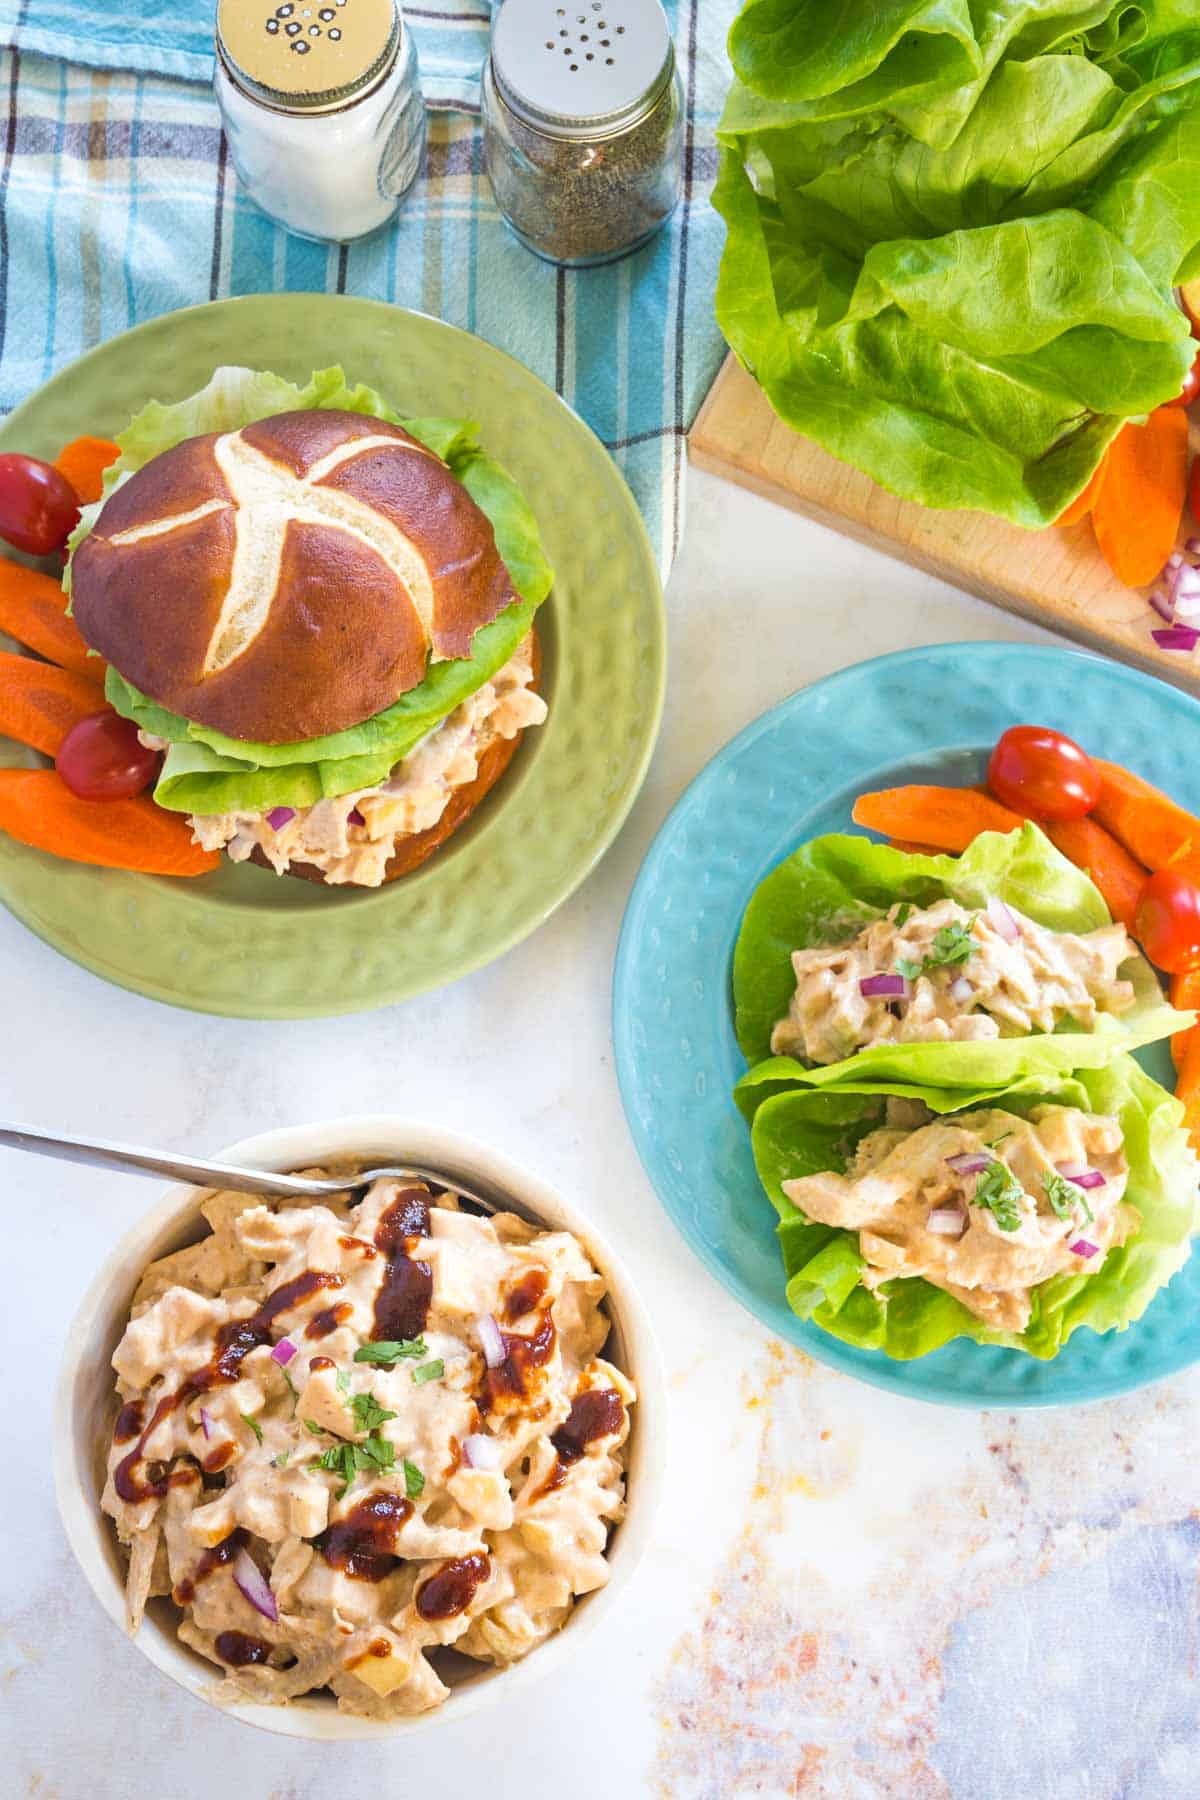 bbq chicken salad in a bowl, a barbecue chicken salad sandwich on a green plate and lettuce wraps on a blue plate